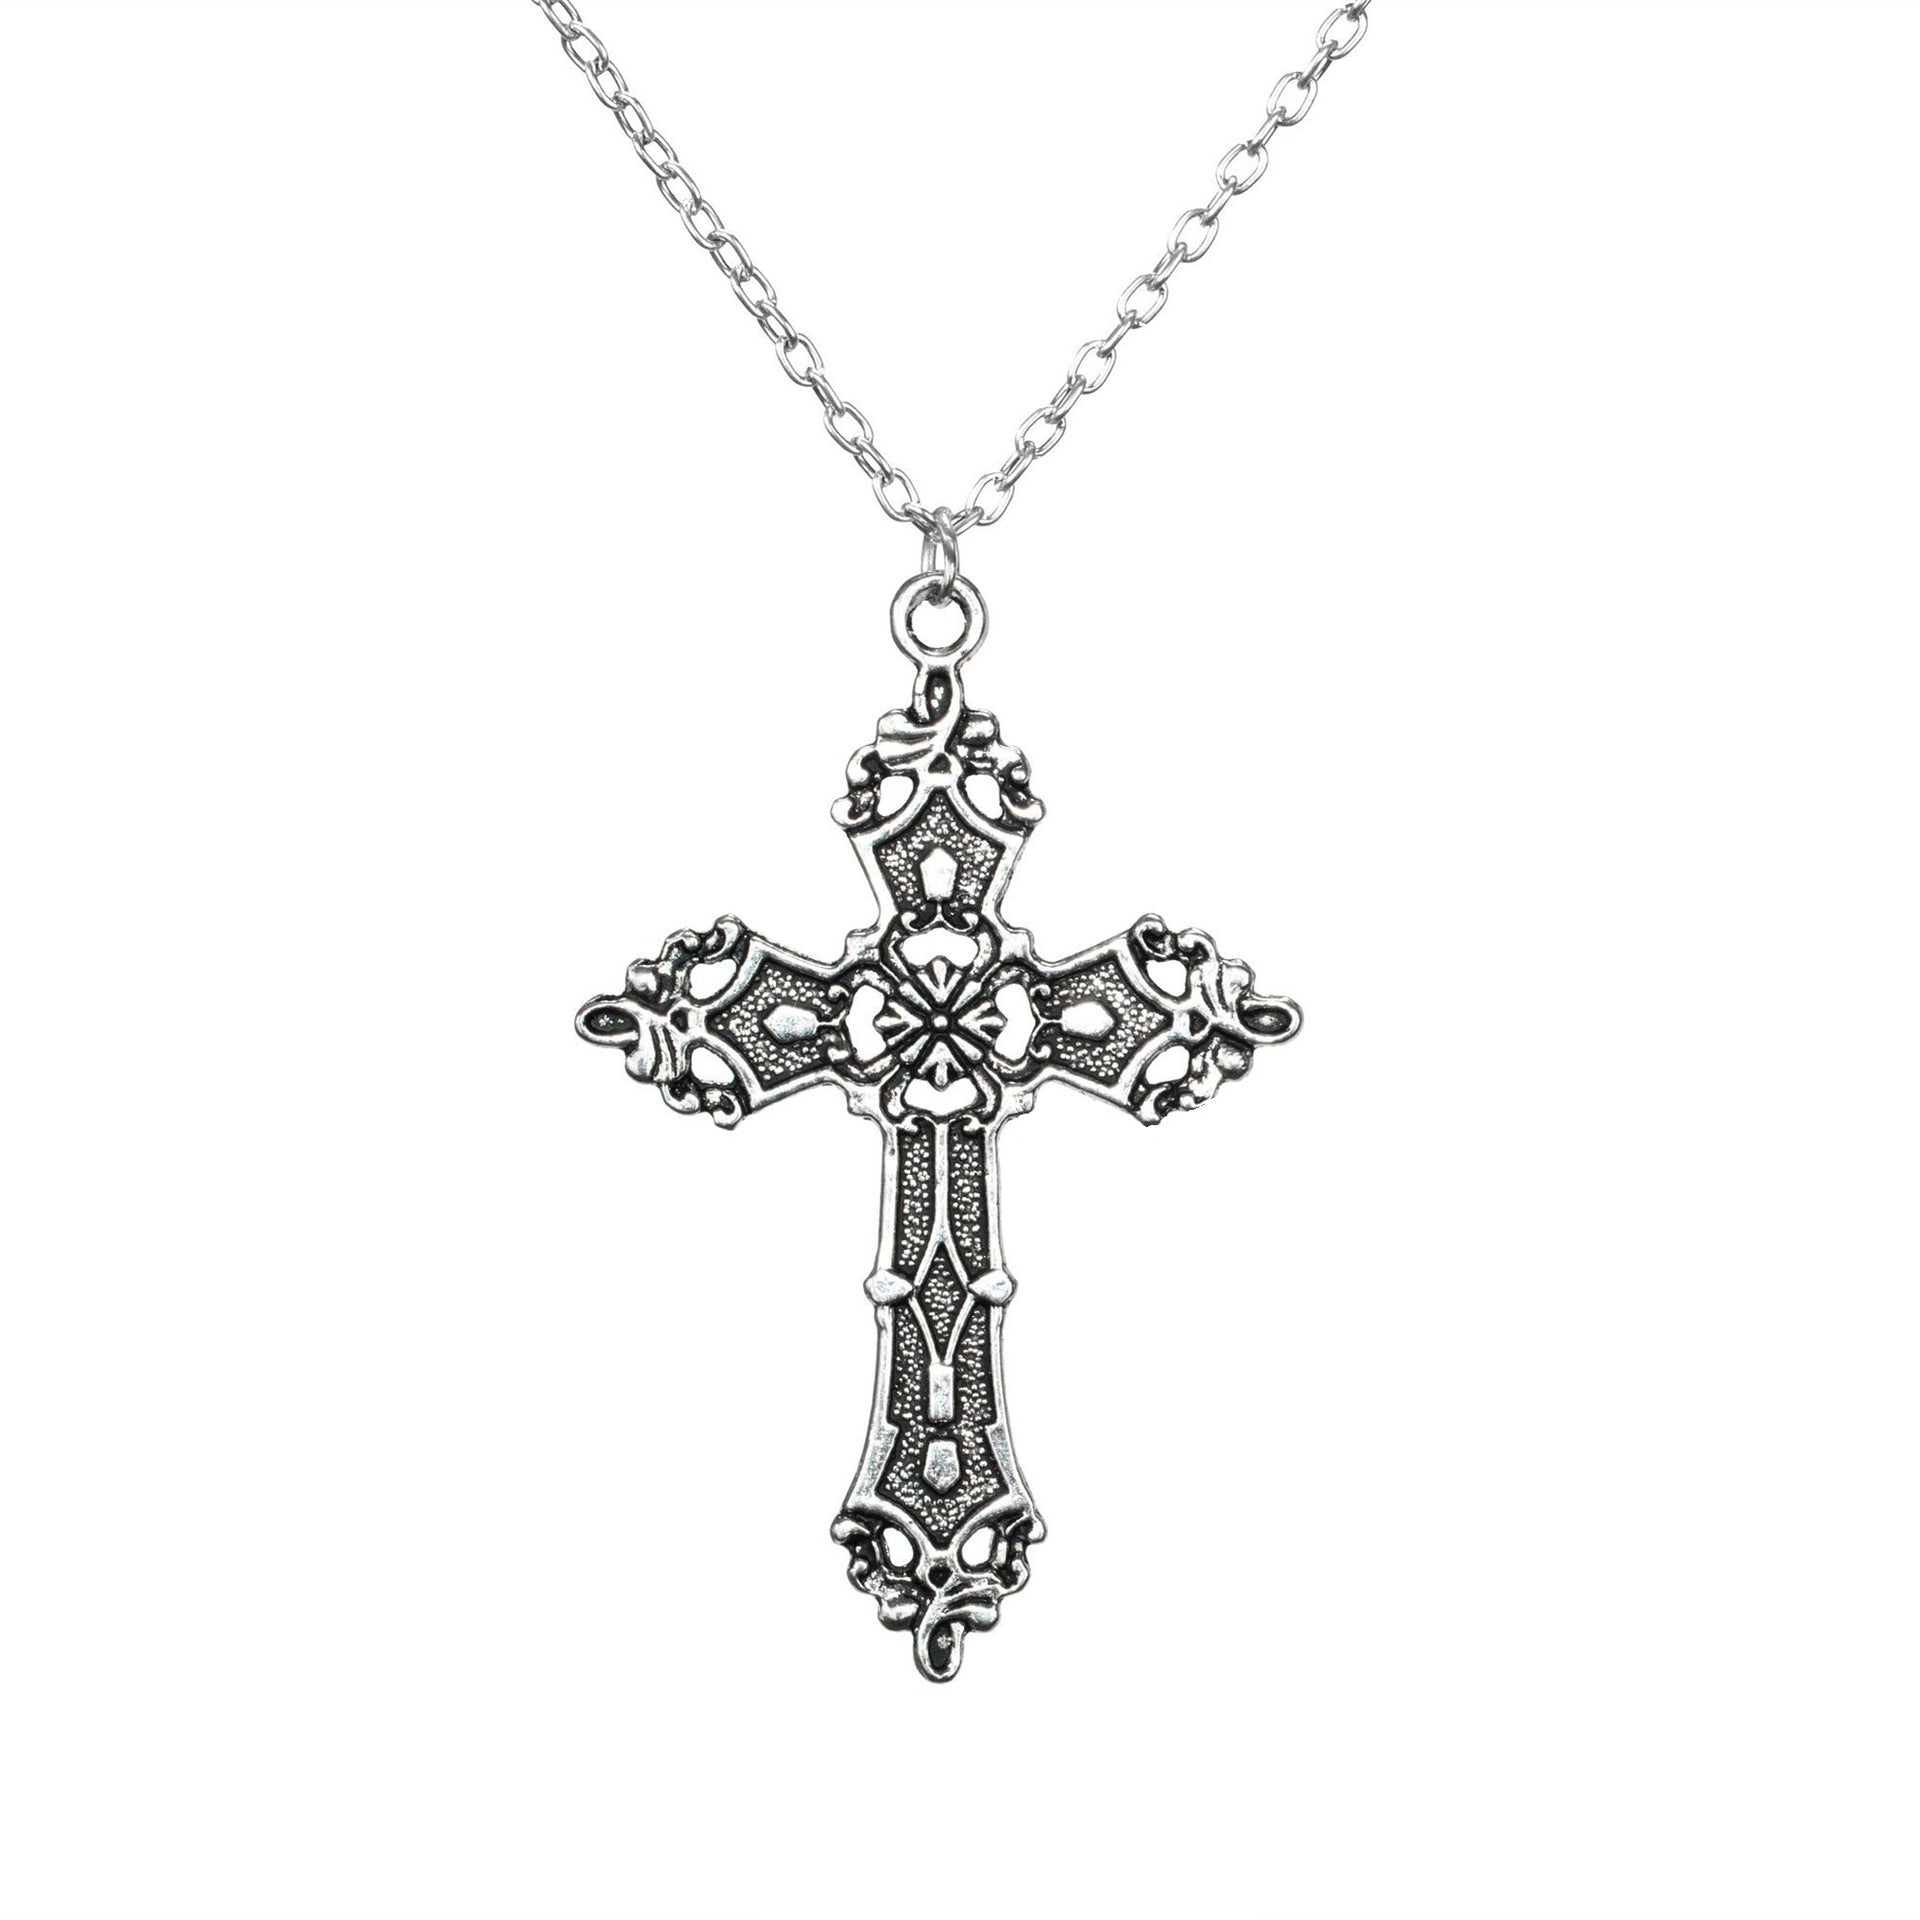 A Vintage Gothic Cross Necklace on a chain from Maramalive™.